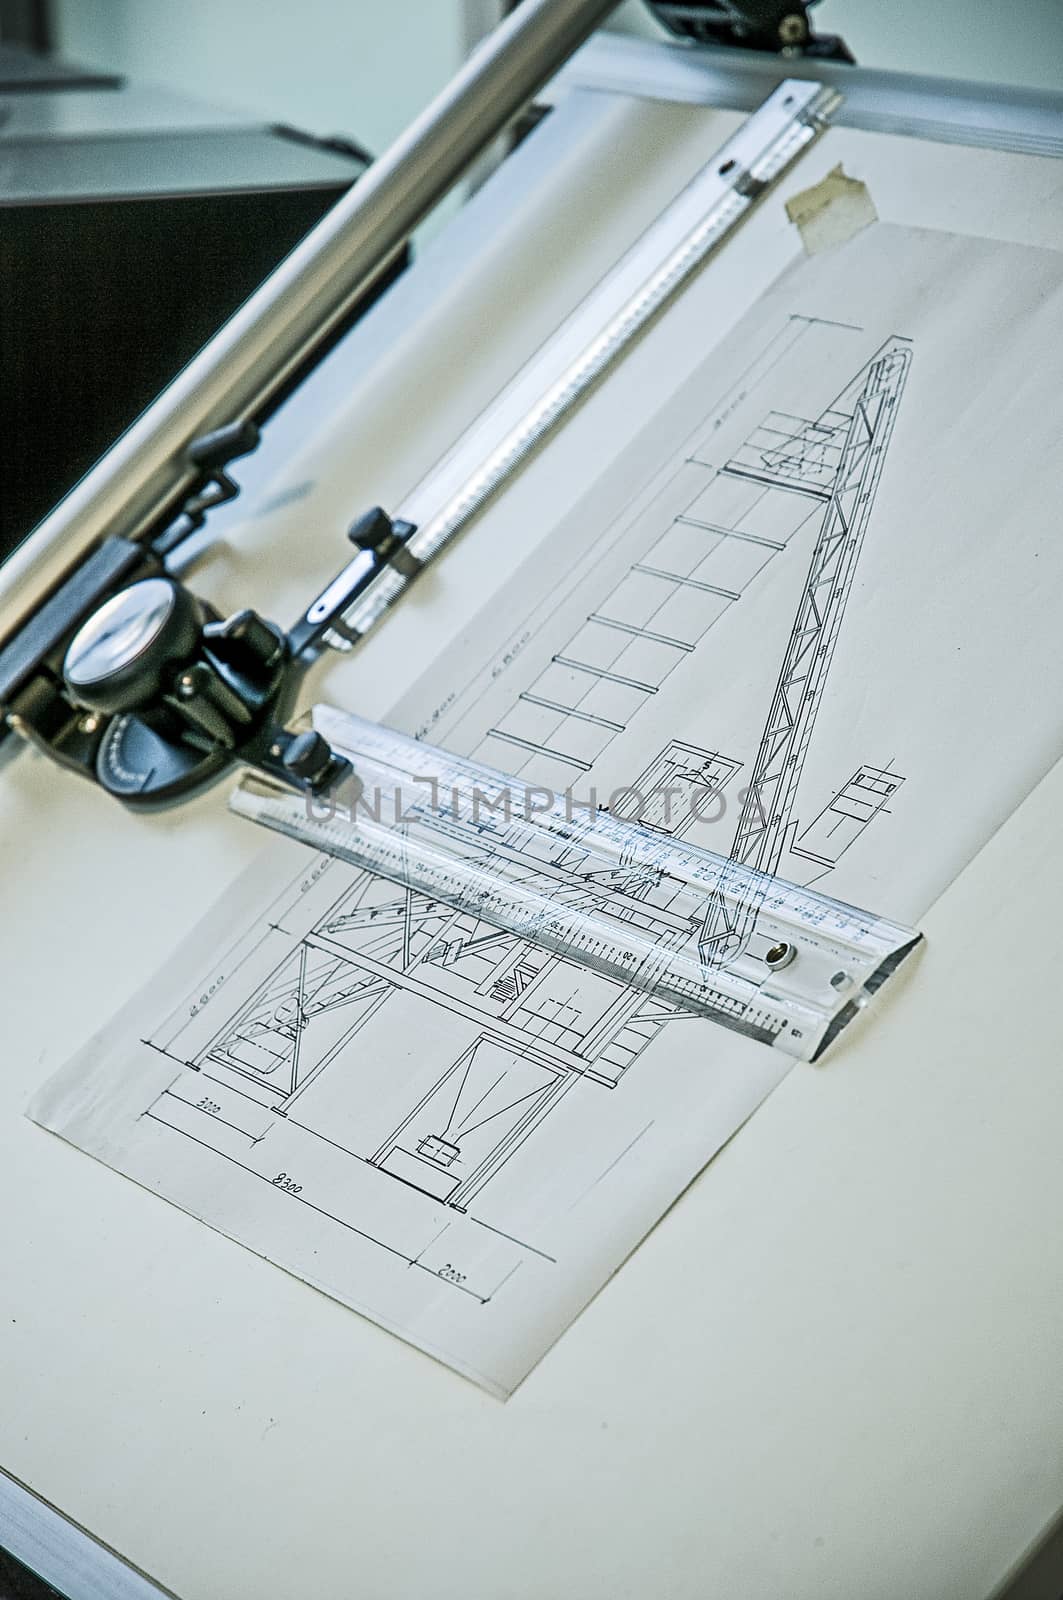 The value of handmade work of the past. A technical drawing of a project made entirely by hand on an old table-top desk, ingenuity and passion for one's work